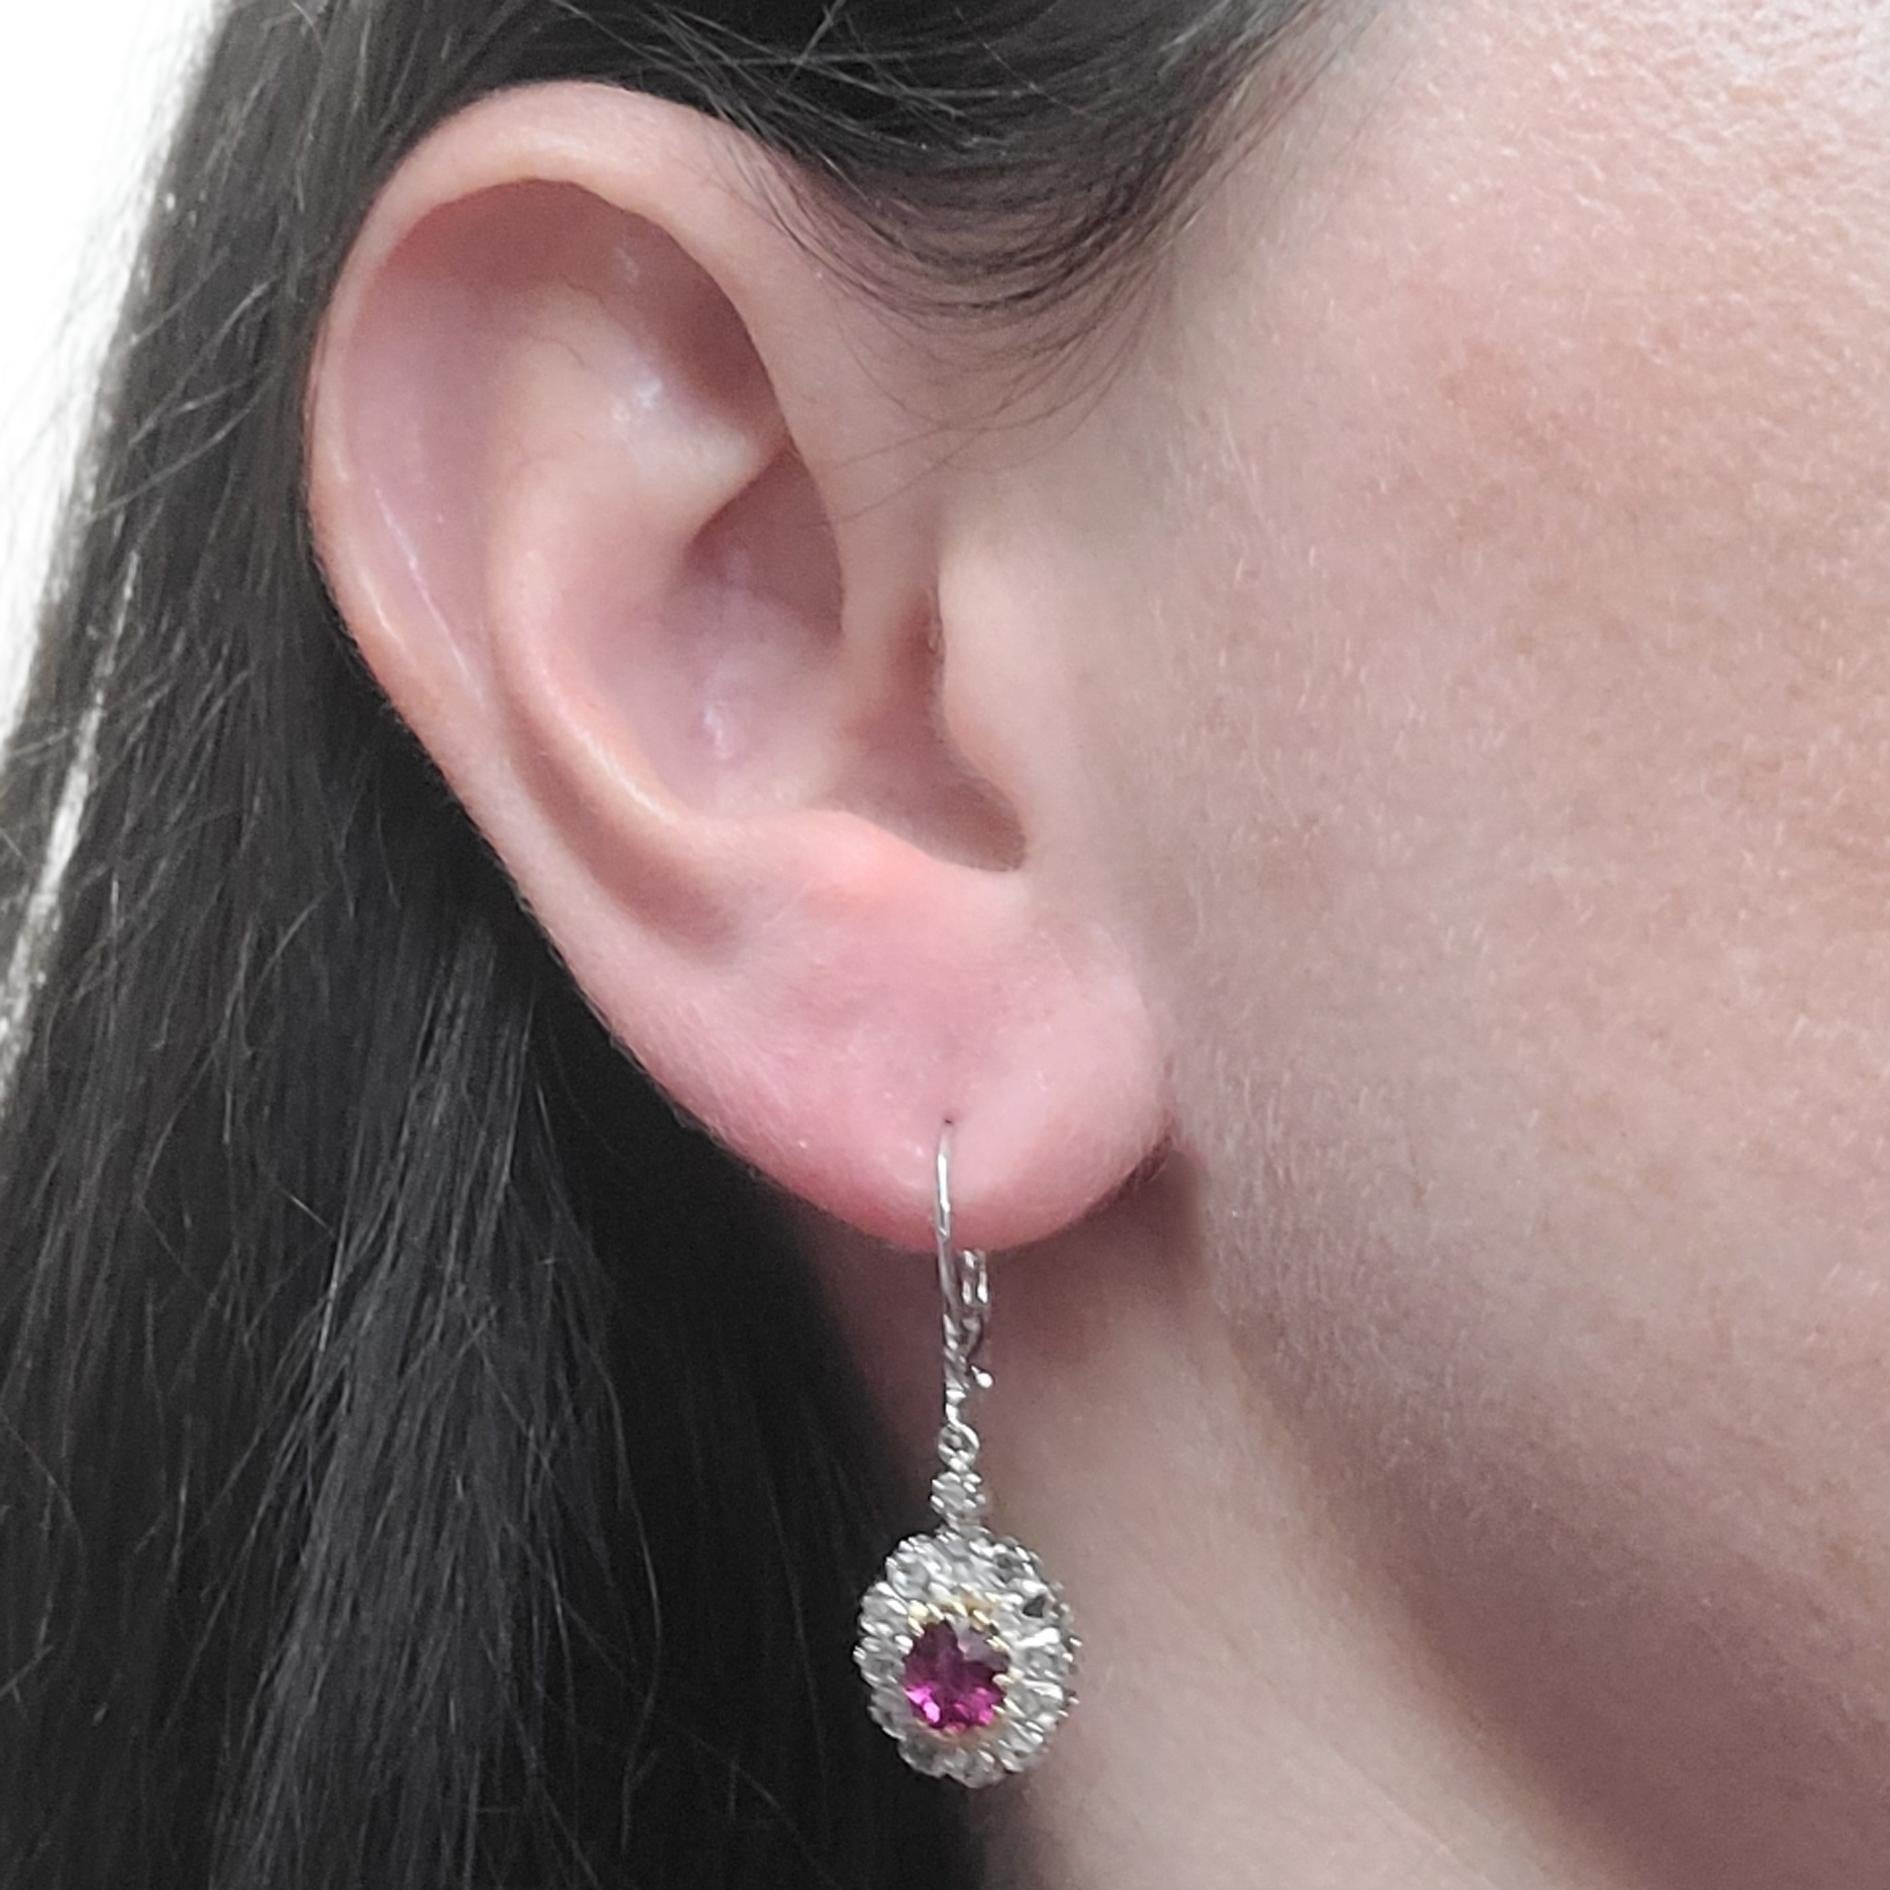 Antique 18 Karat White & Yellow Gold Drop Earrings Featuring 2 Oval Rubies Totaling Approximately 1.00 Carat & 26 Rose Cut Diamonds Totaling Approximately 0.50 Carats. French Wire With Hinged Back. Finished Weight Is 5.0 Grams.